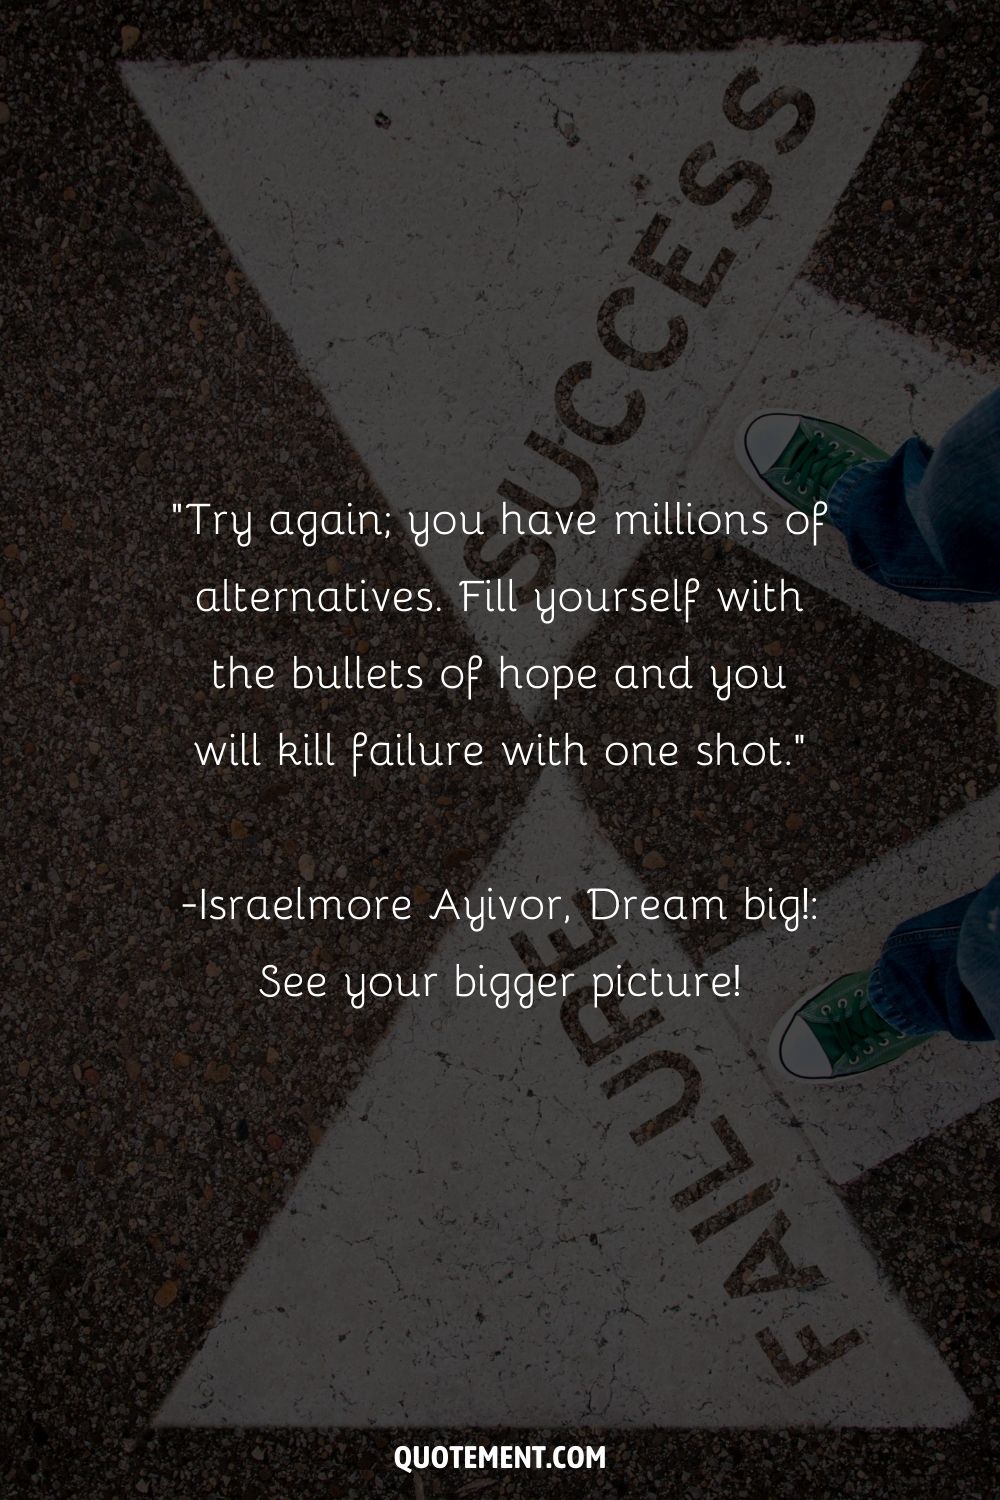 “Try again; you have millions of alternatives. Fill yourself with the bullets of hope and you will kill failure with one shot.” ― Israelmore Ayivor, Dream big! See your bigger picture!